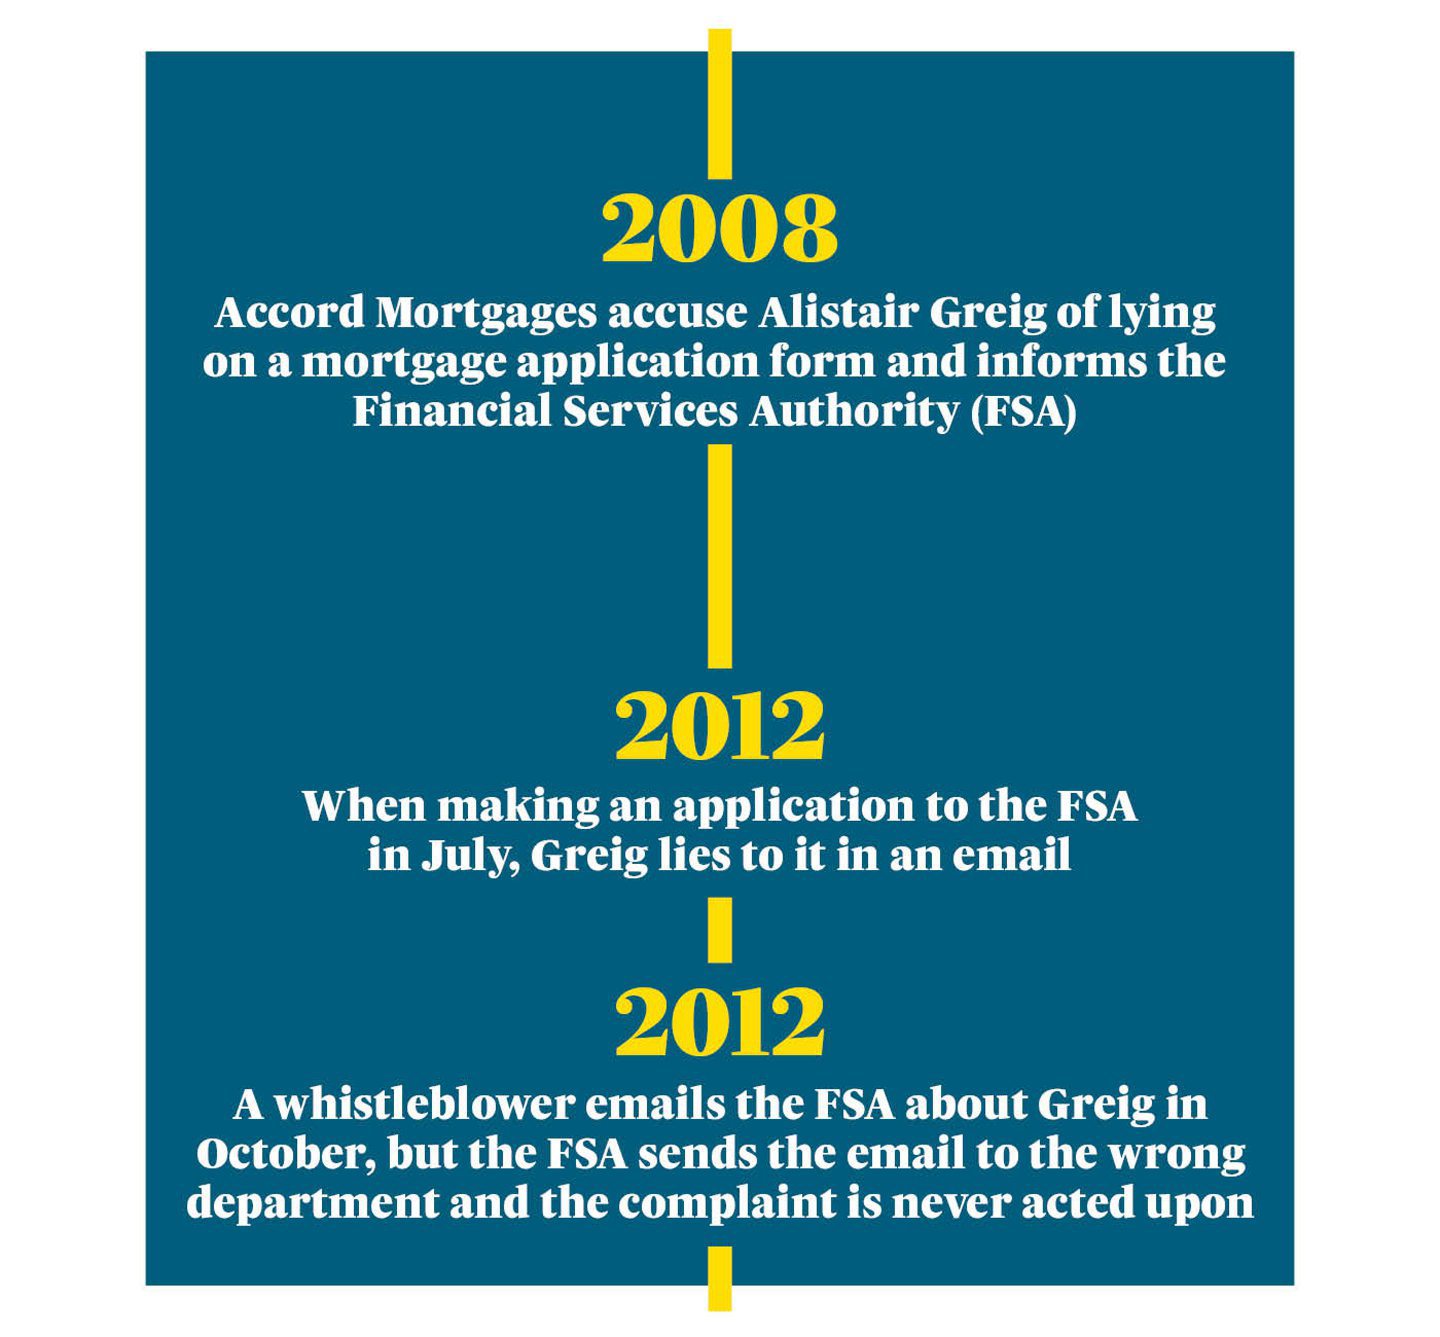 2008 - 2012 graphic showing Accord Mortgages accusing Alistair Greig of lying to a whistleblower alerting the FSA in 2012